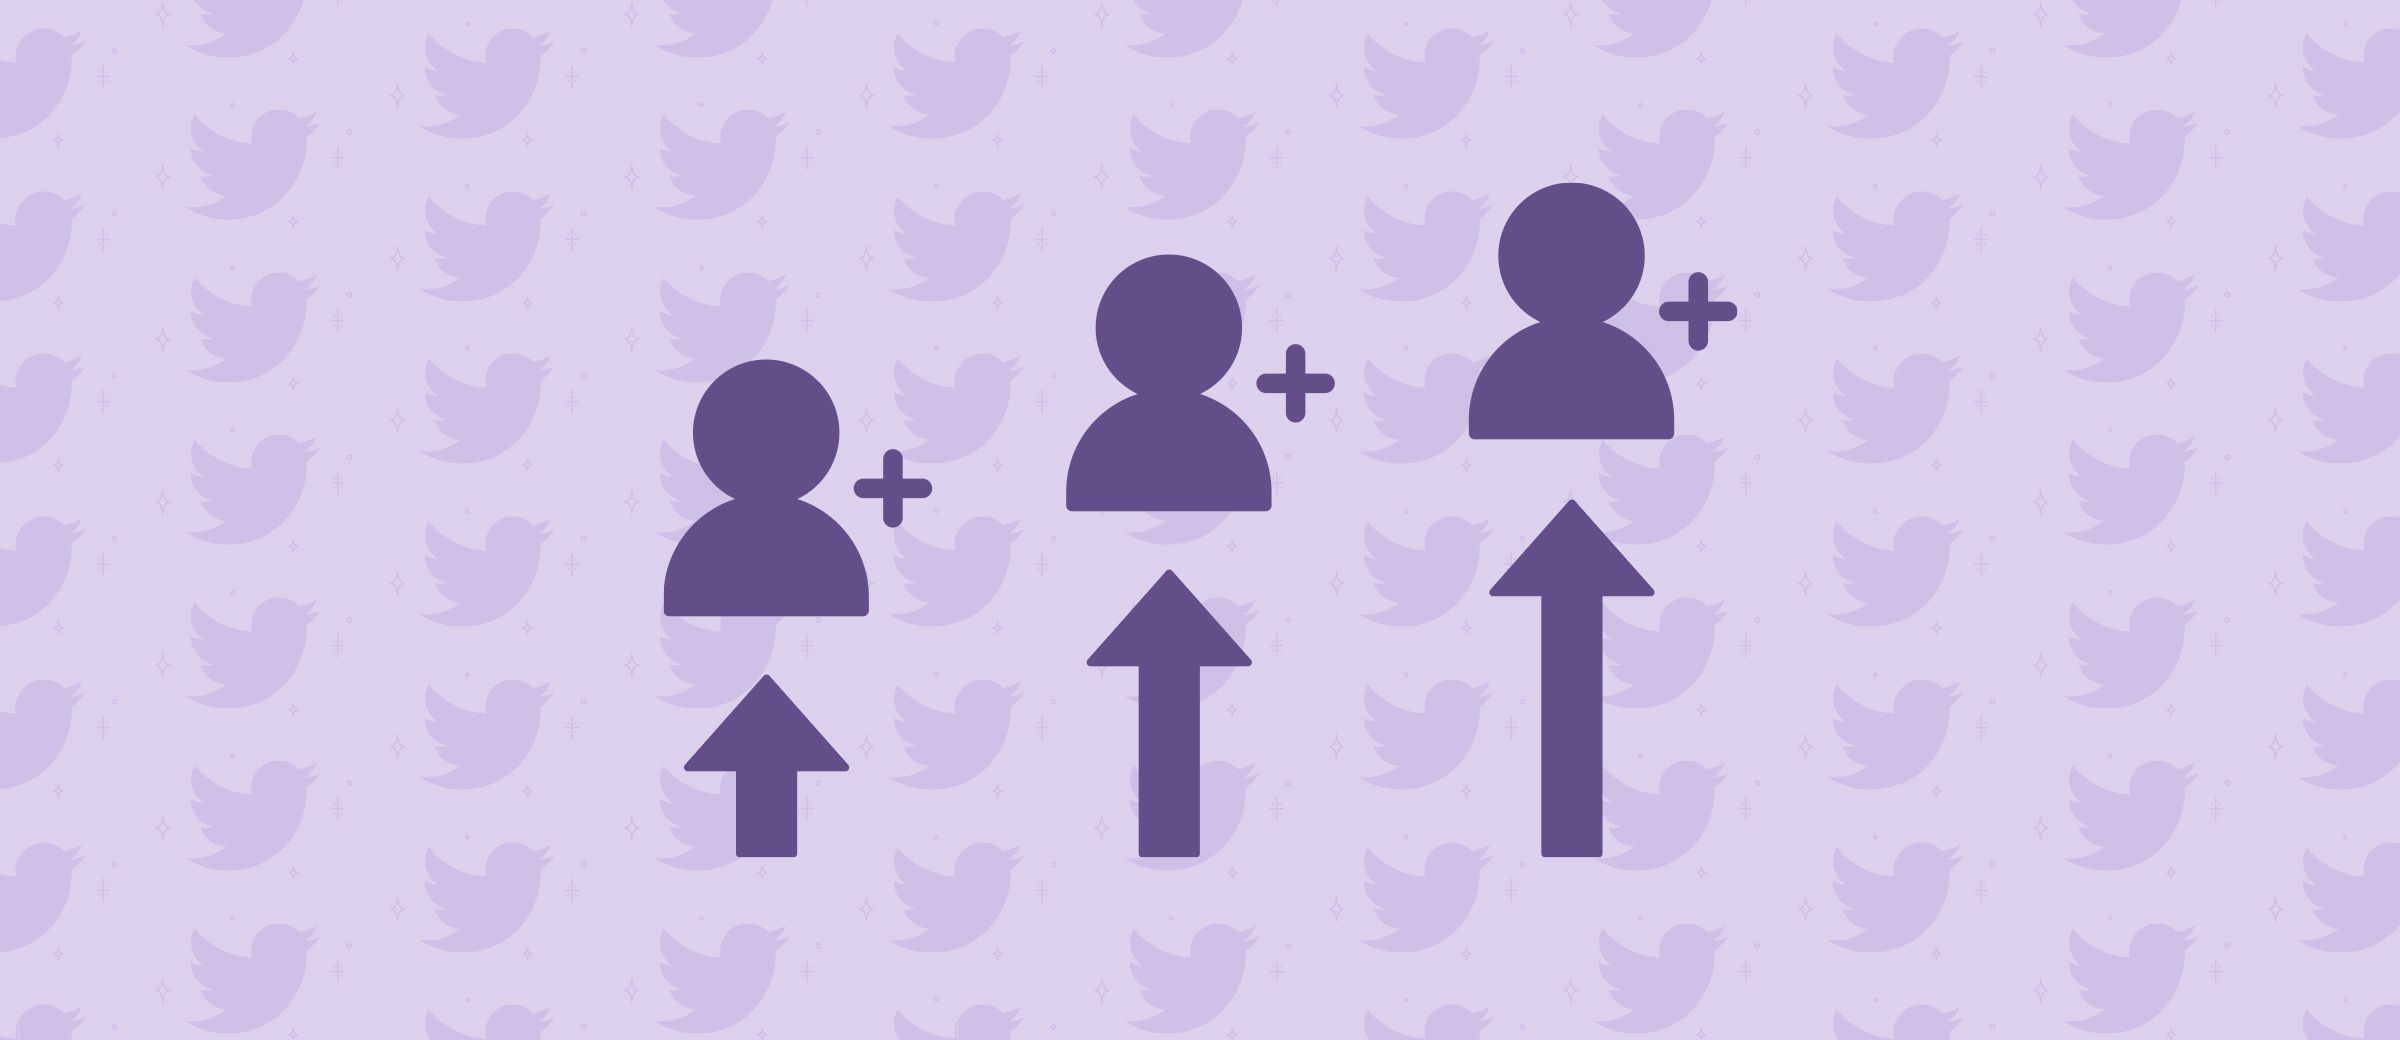 How to Get More Twitter Followers: A Guide for Business Owners, by gabriella-layne-avery